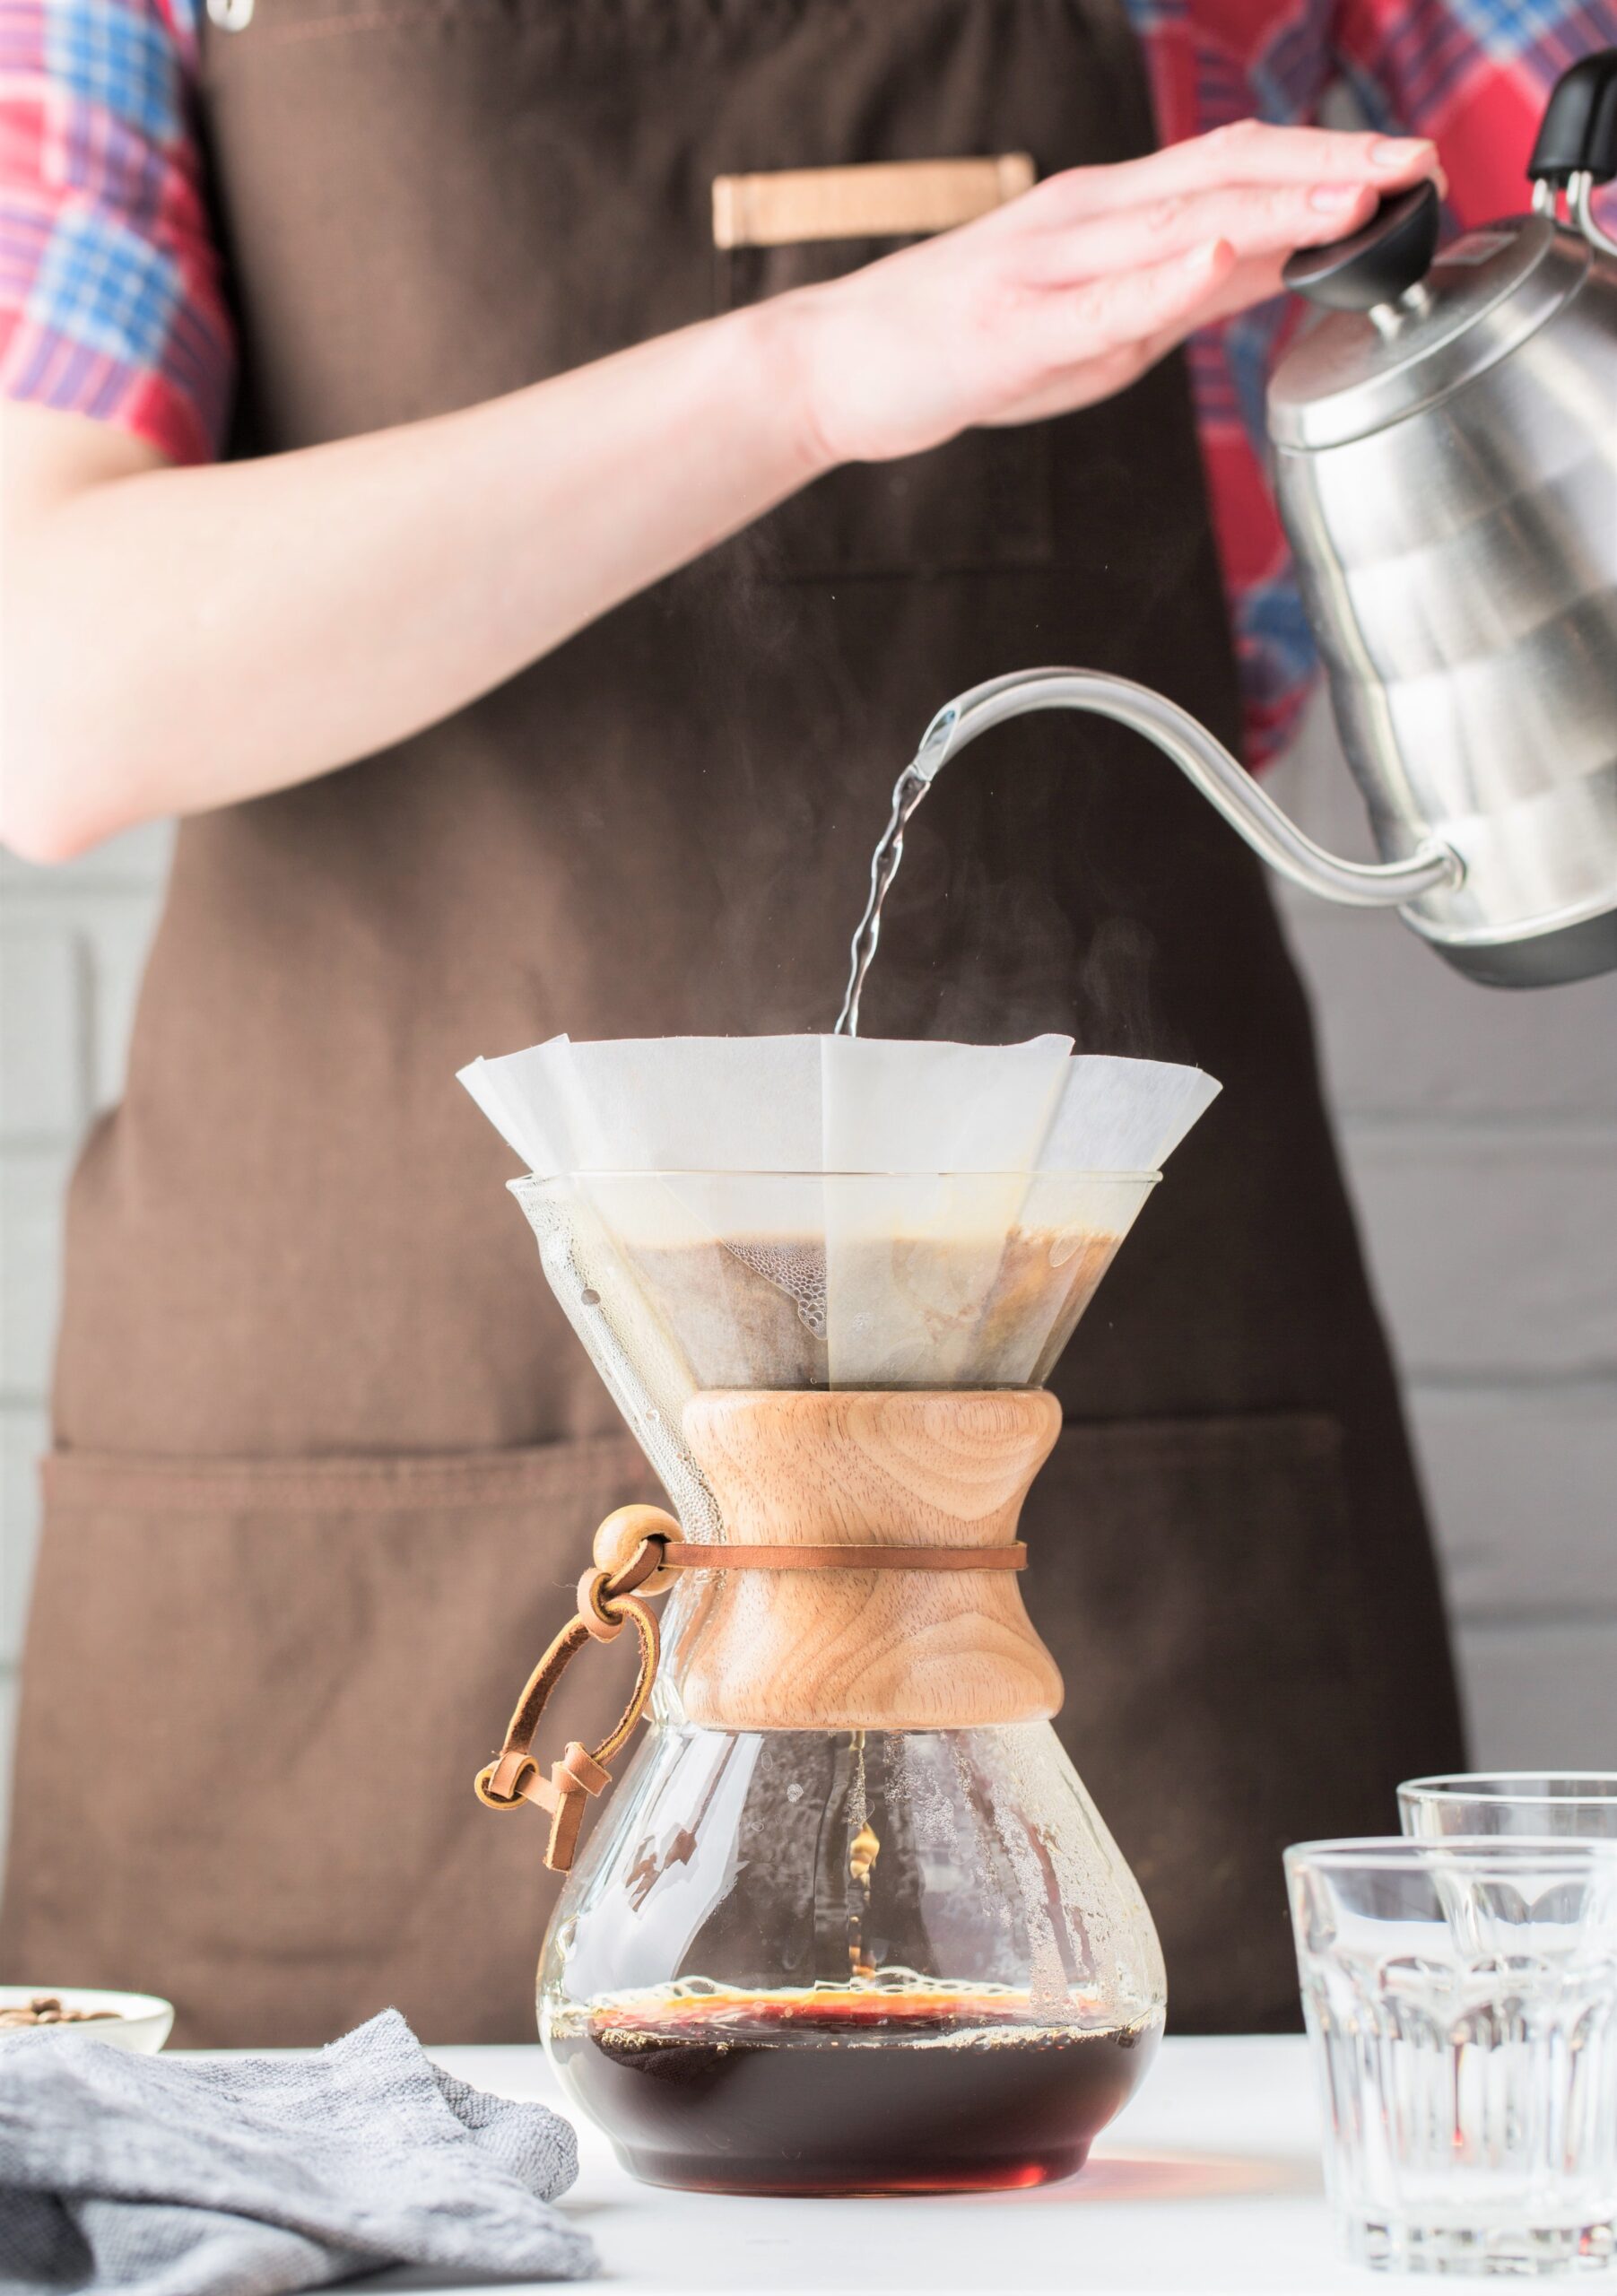 Woman pours water over coffee in filter. This article covers how single-origin coffee and how it differs from blends and mass produced coffees.